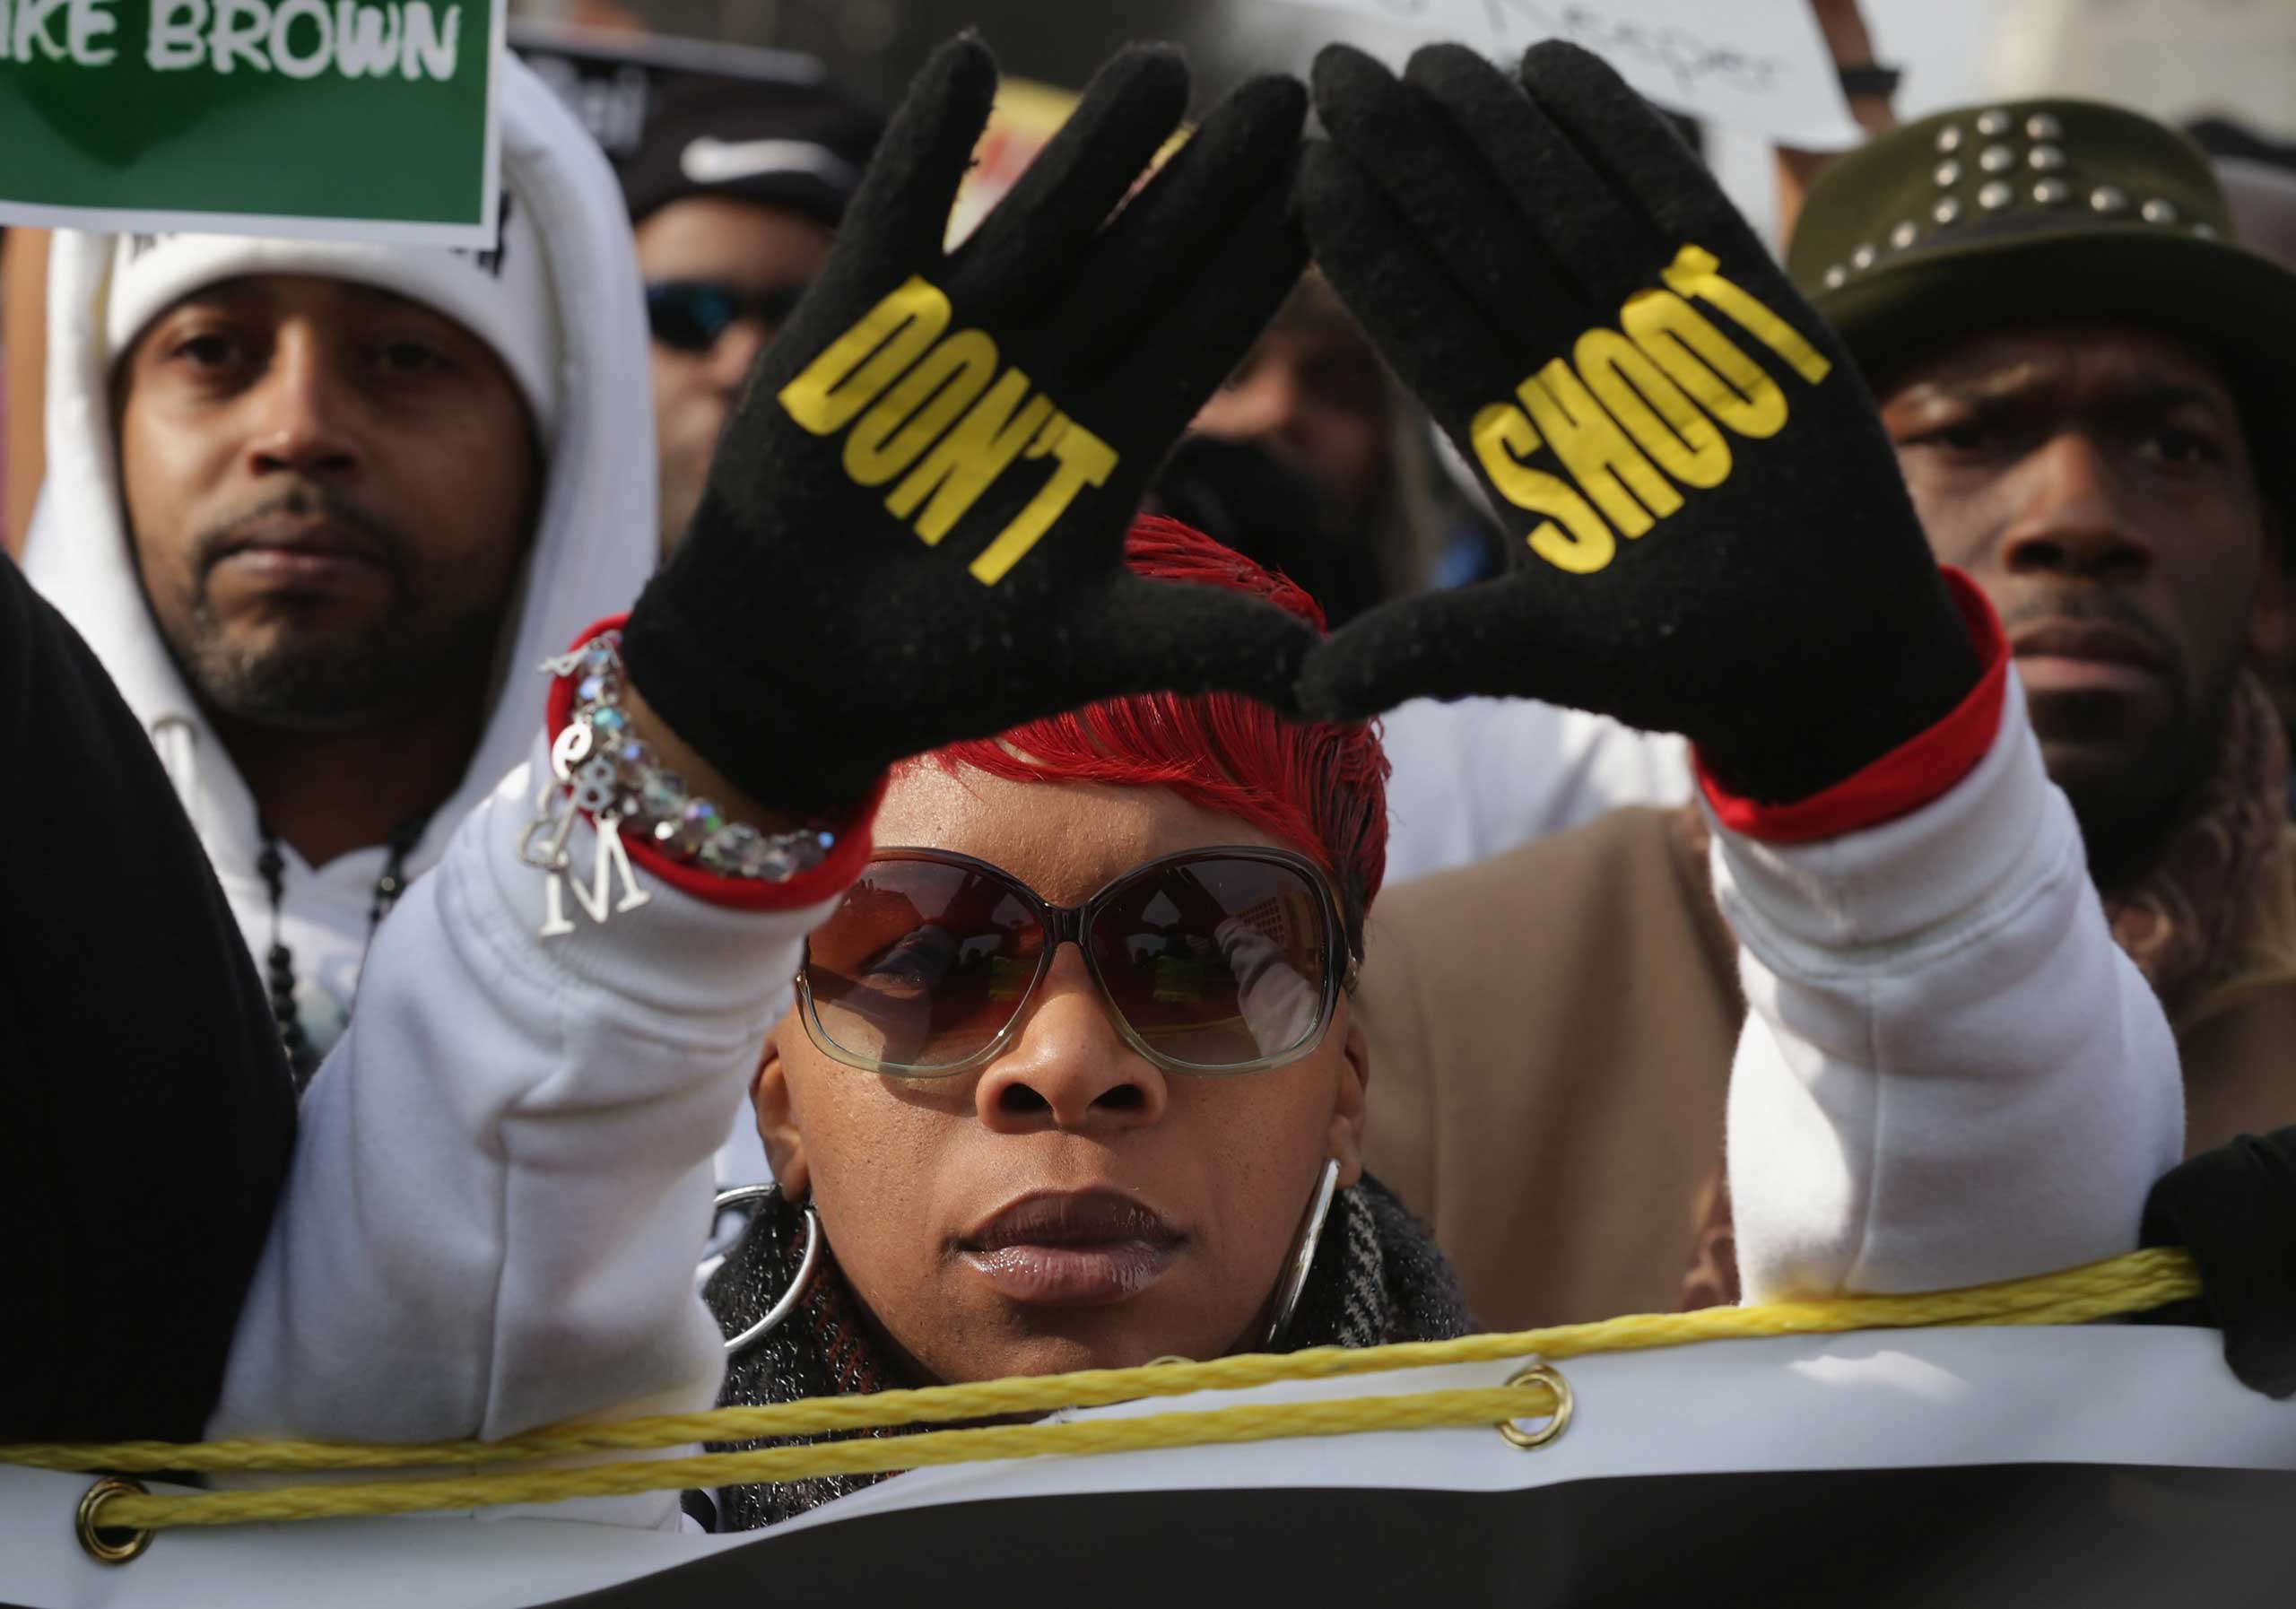 Lesley McSpadden, mother of unarmed teenager Michael Brown, shot and killed in Ferguson, Mo., in August, helps lead the march on Dec. 13, 2014 in Washington D.C.